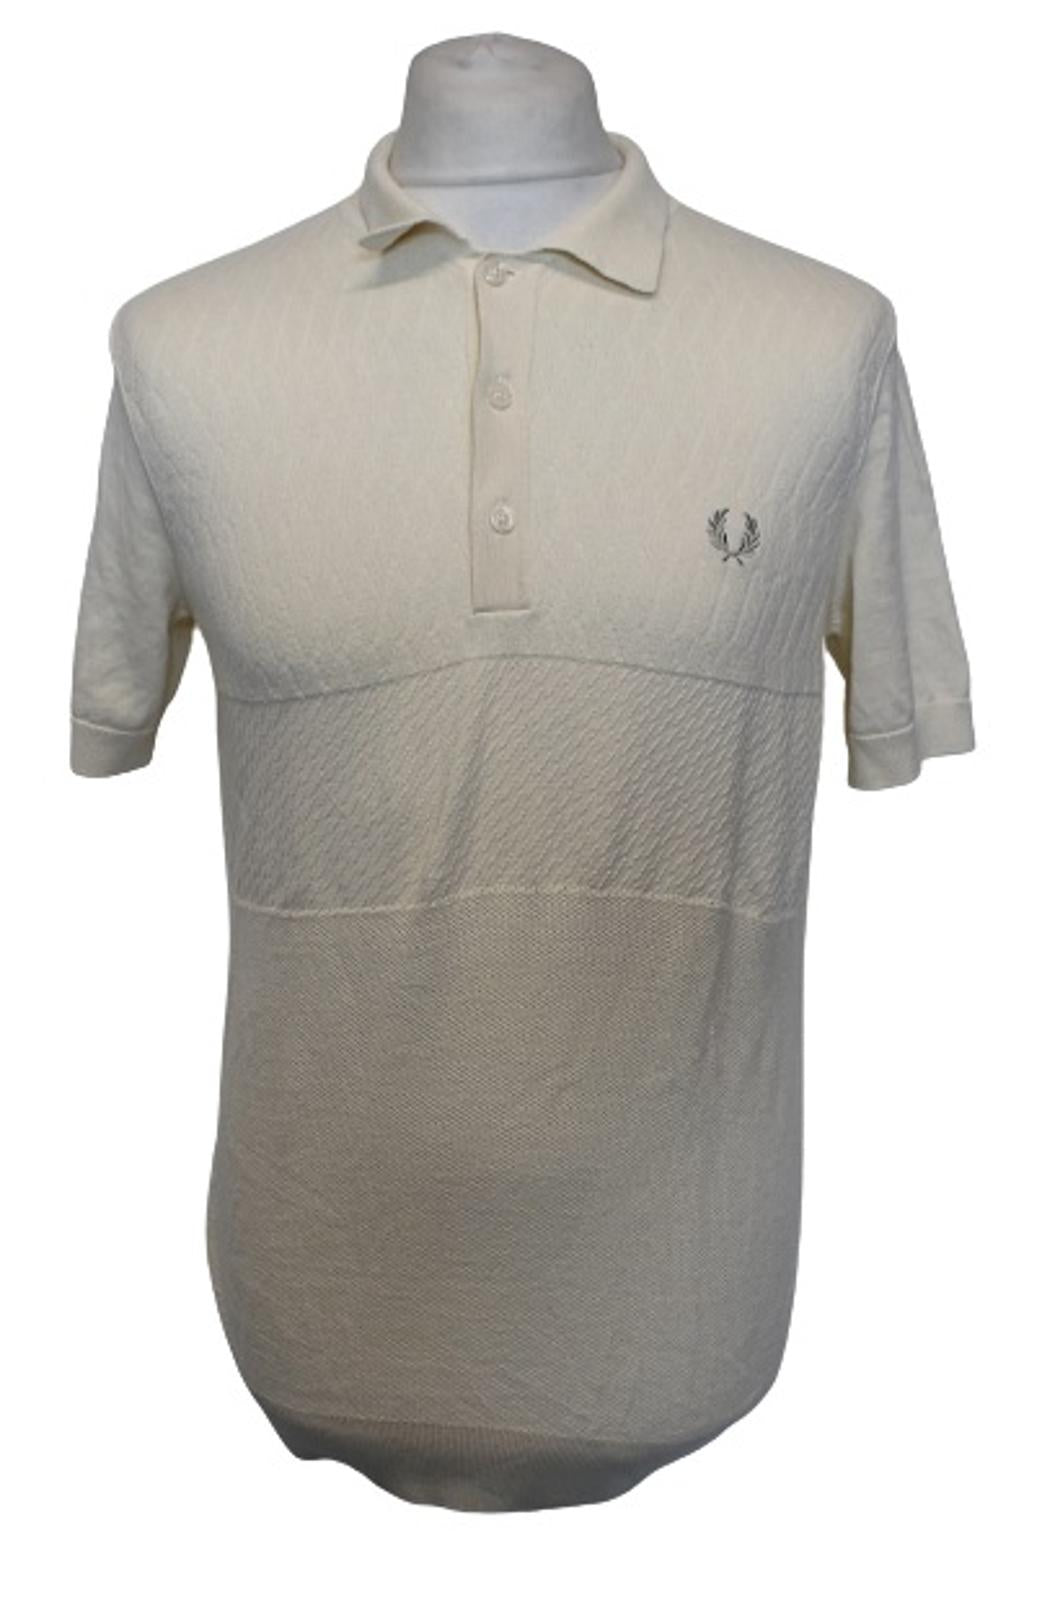 FRED PERRY Men's Ivory Short Sleeve Tonal Knitted Panel Polo Shirt Size M